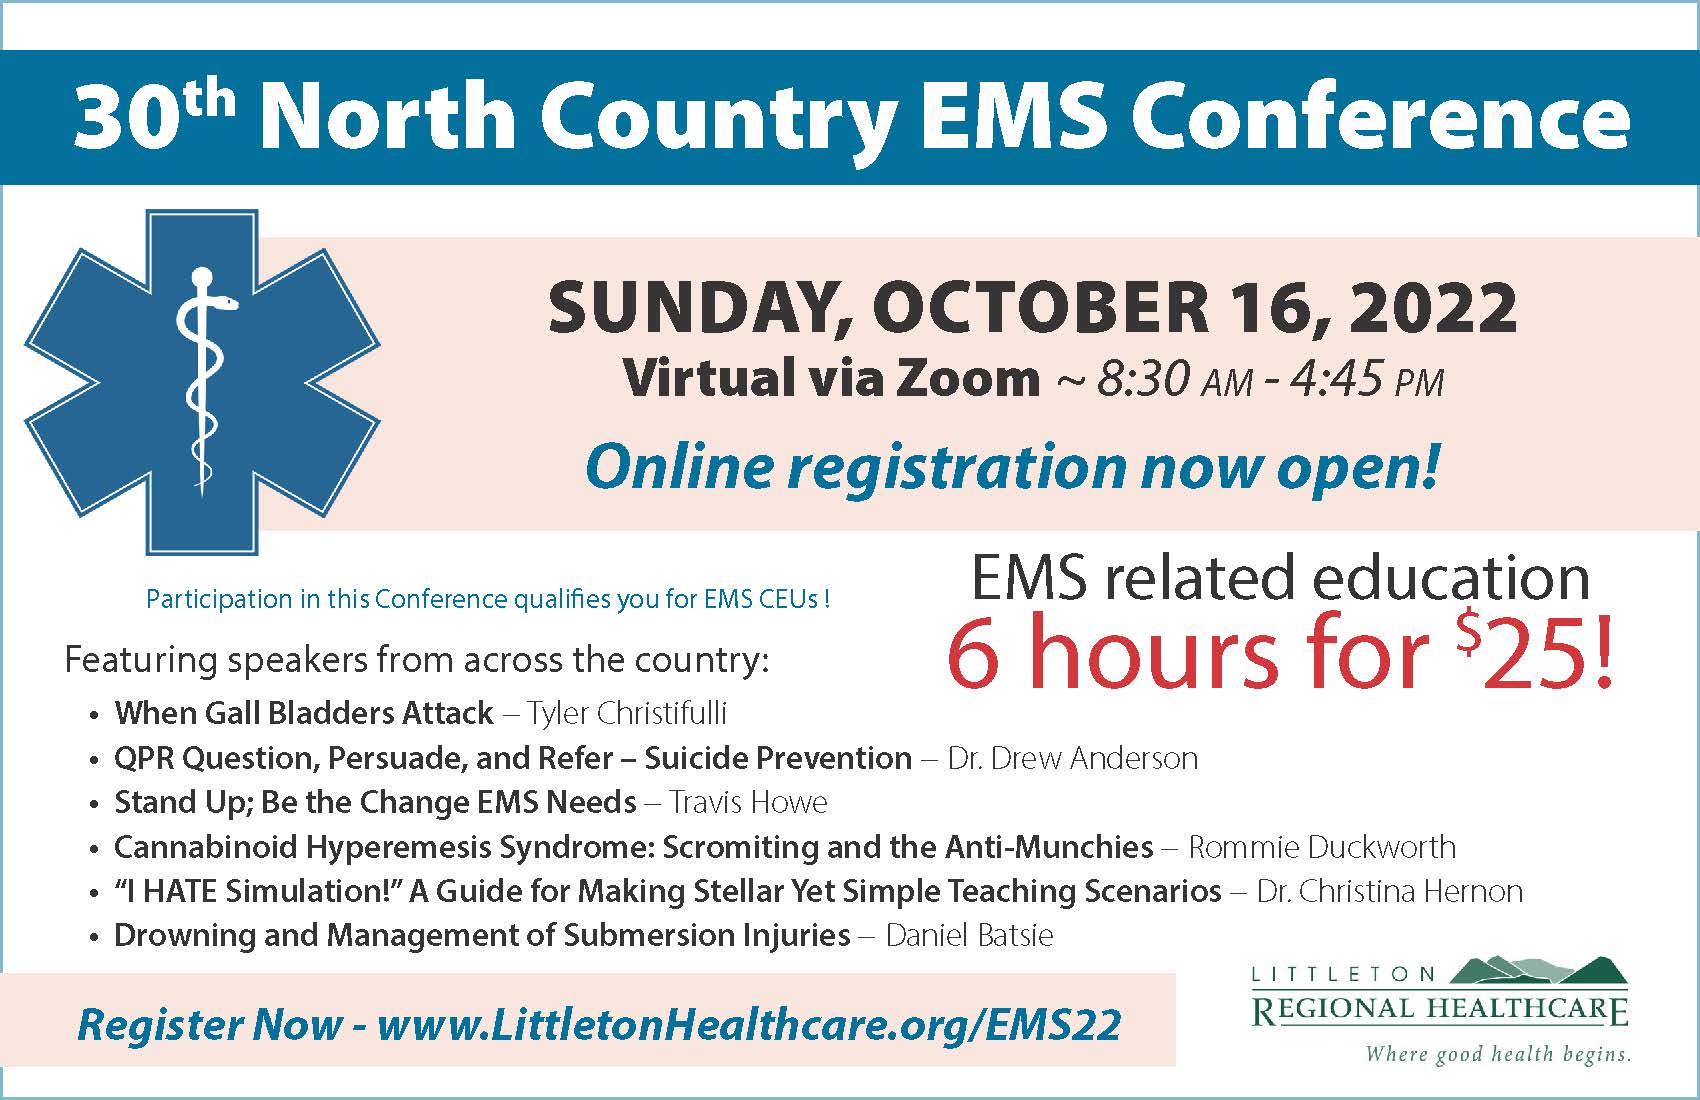 30th North Country EMS Conference - Register online today!